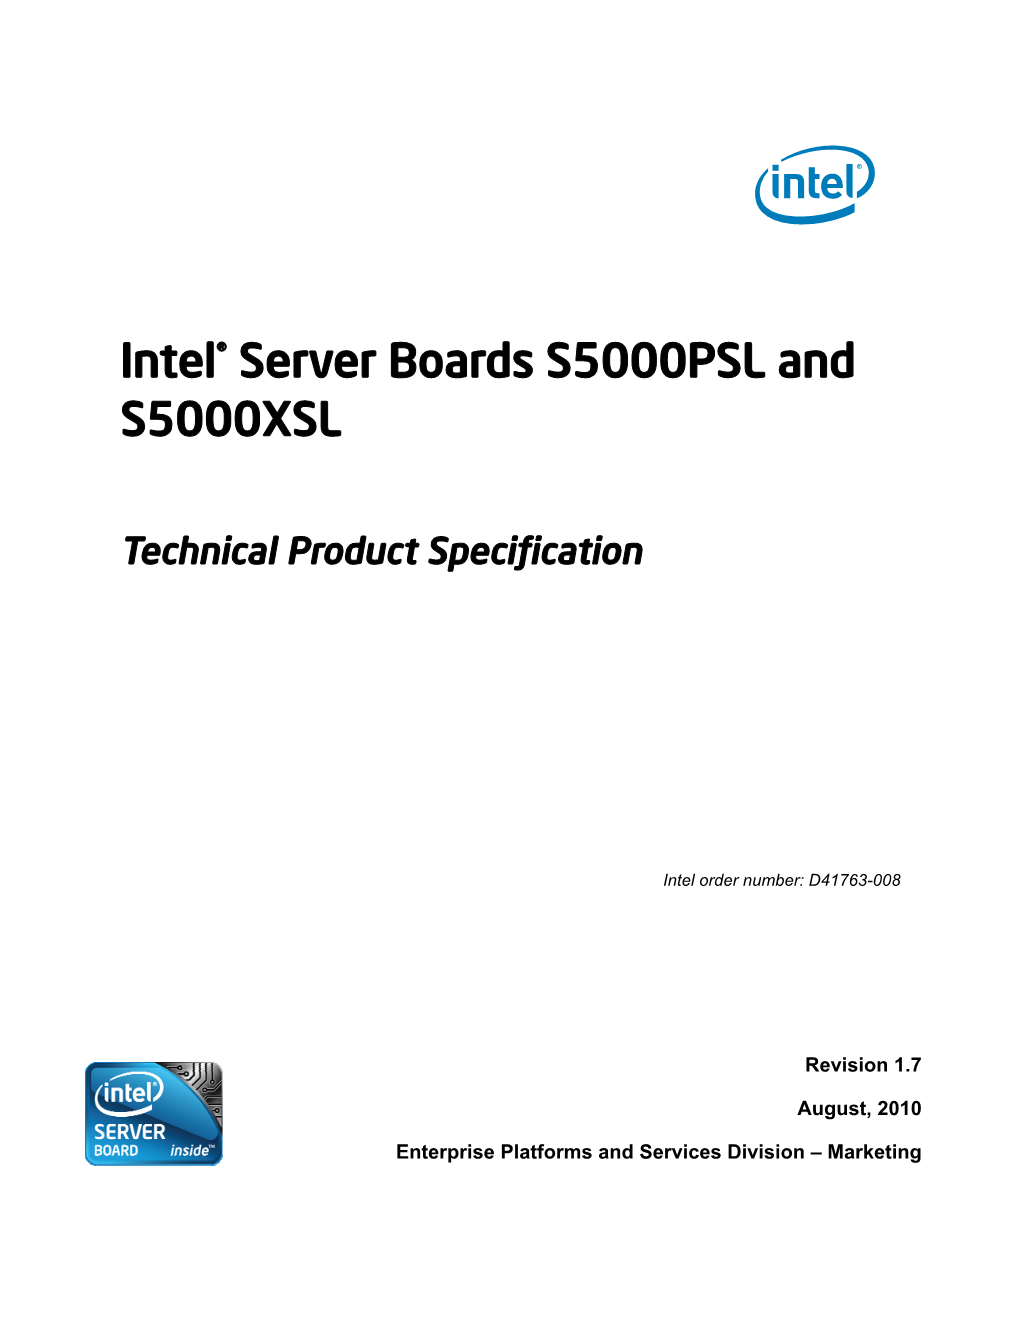 Intel® Server Boards S5000PSL and S5000XSL